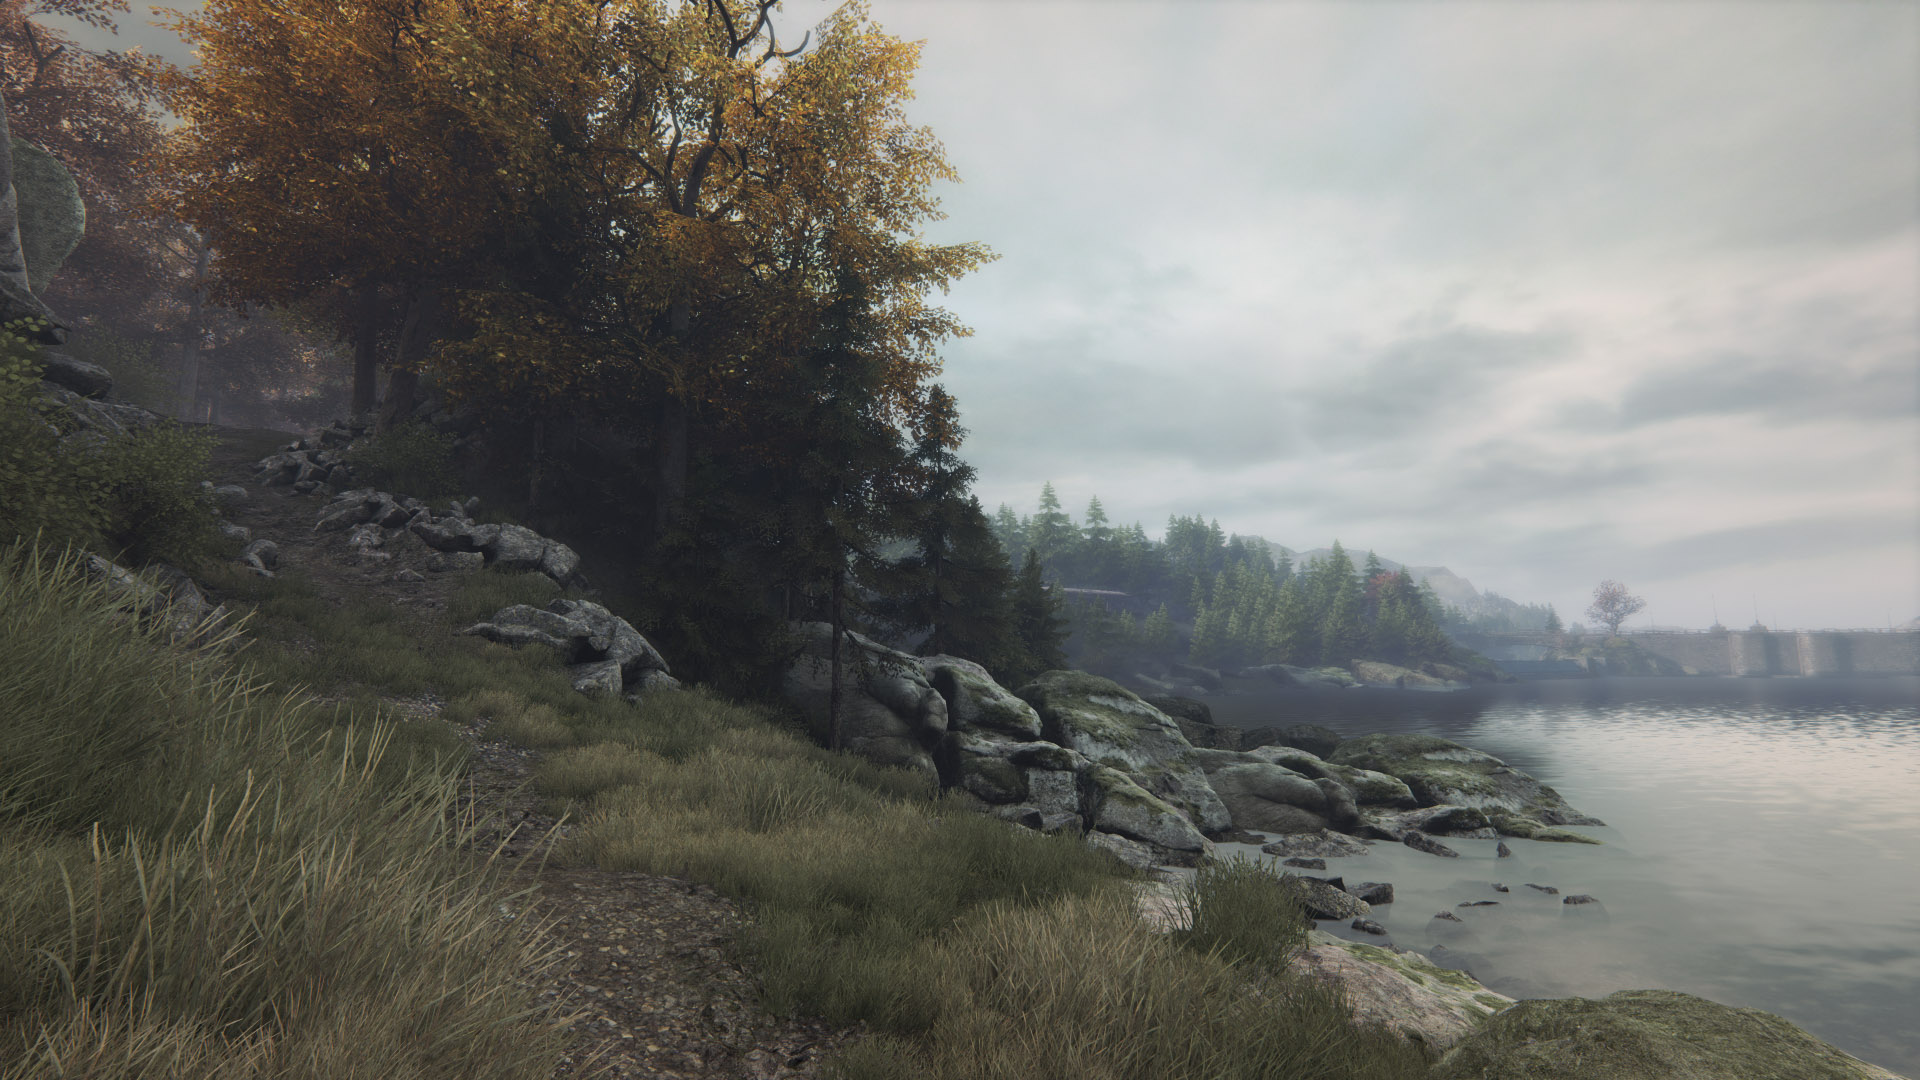 the vanishing of ethan carter play time